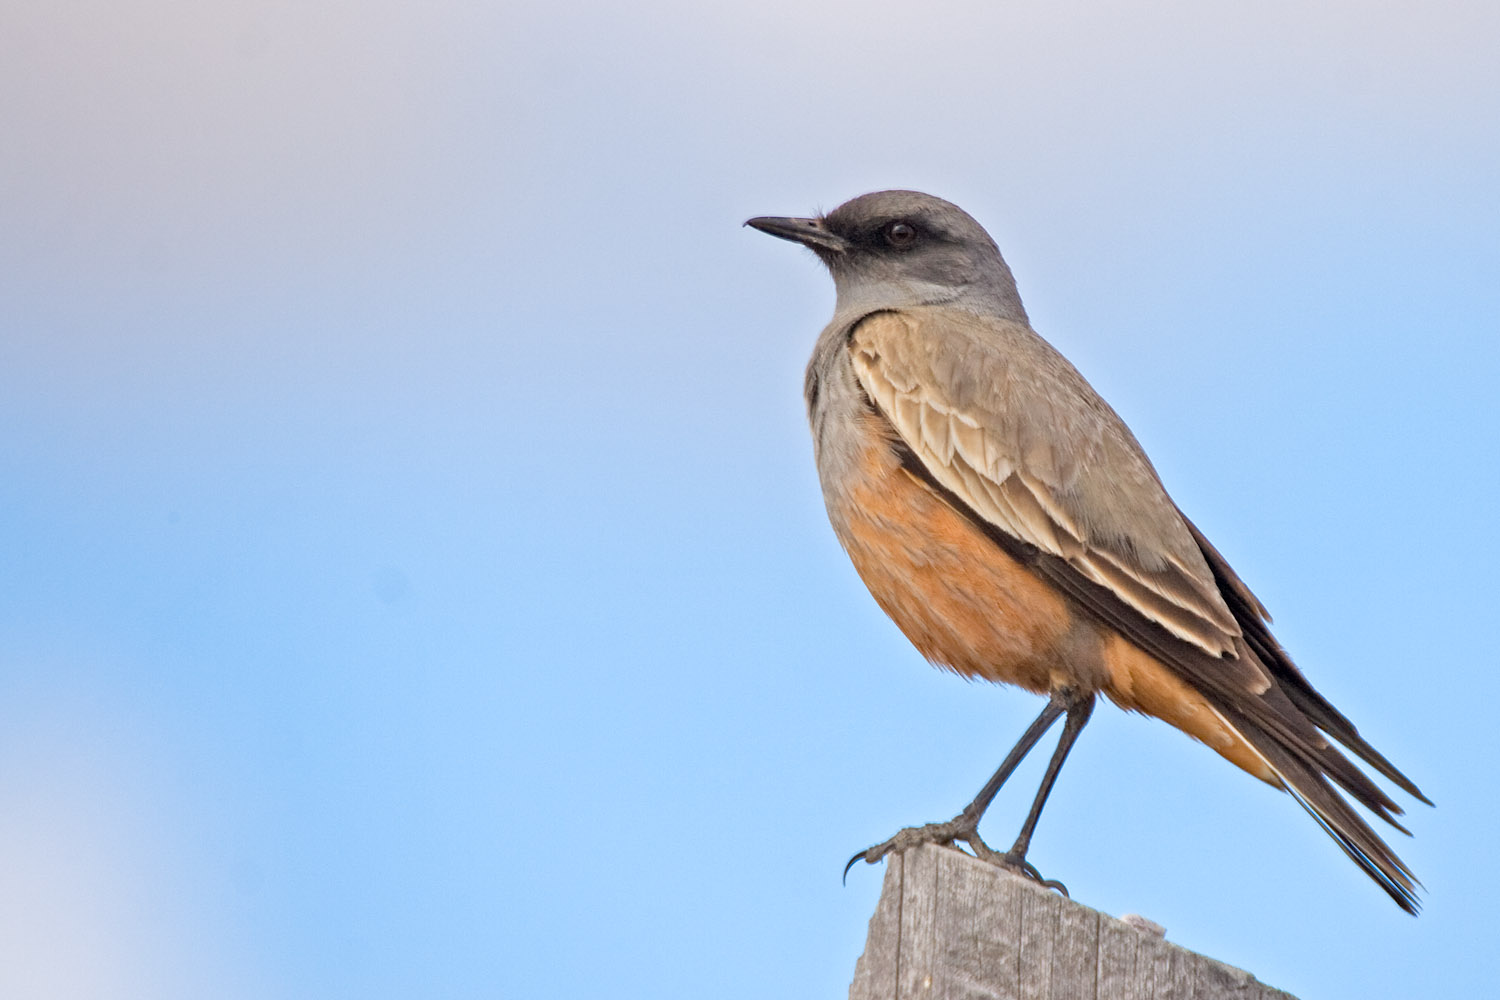 birding the patagonian steppes